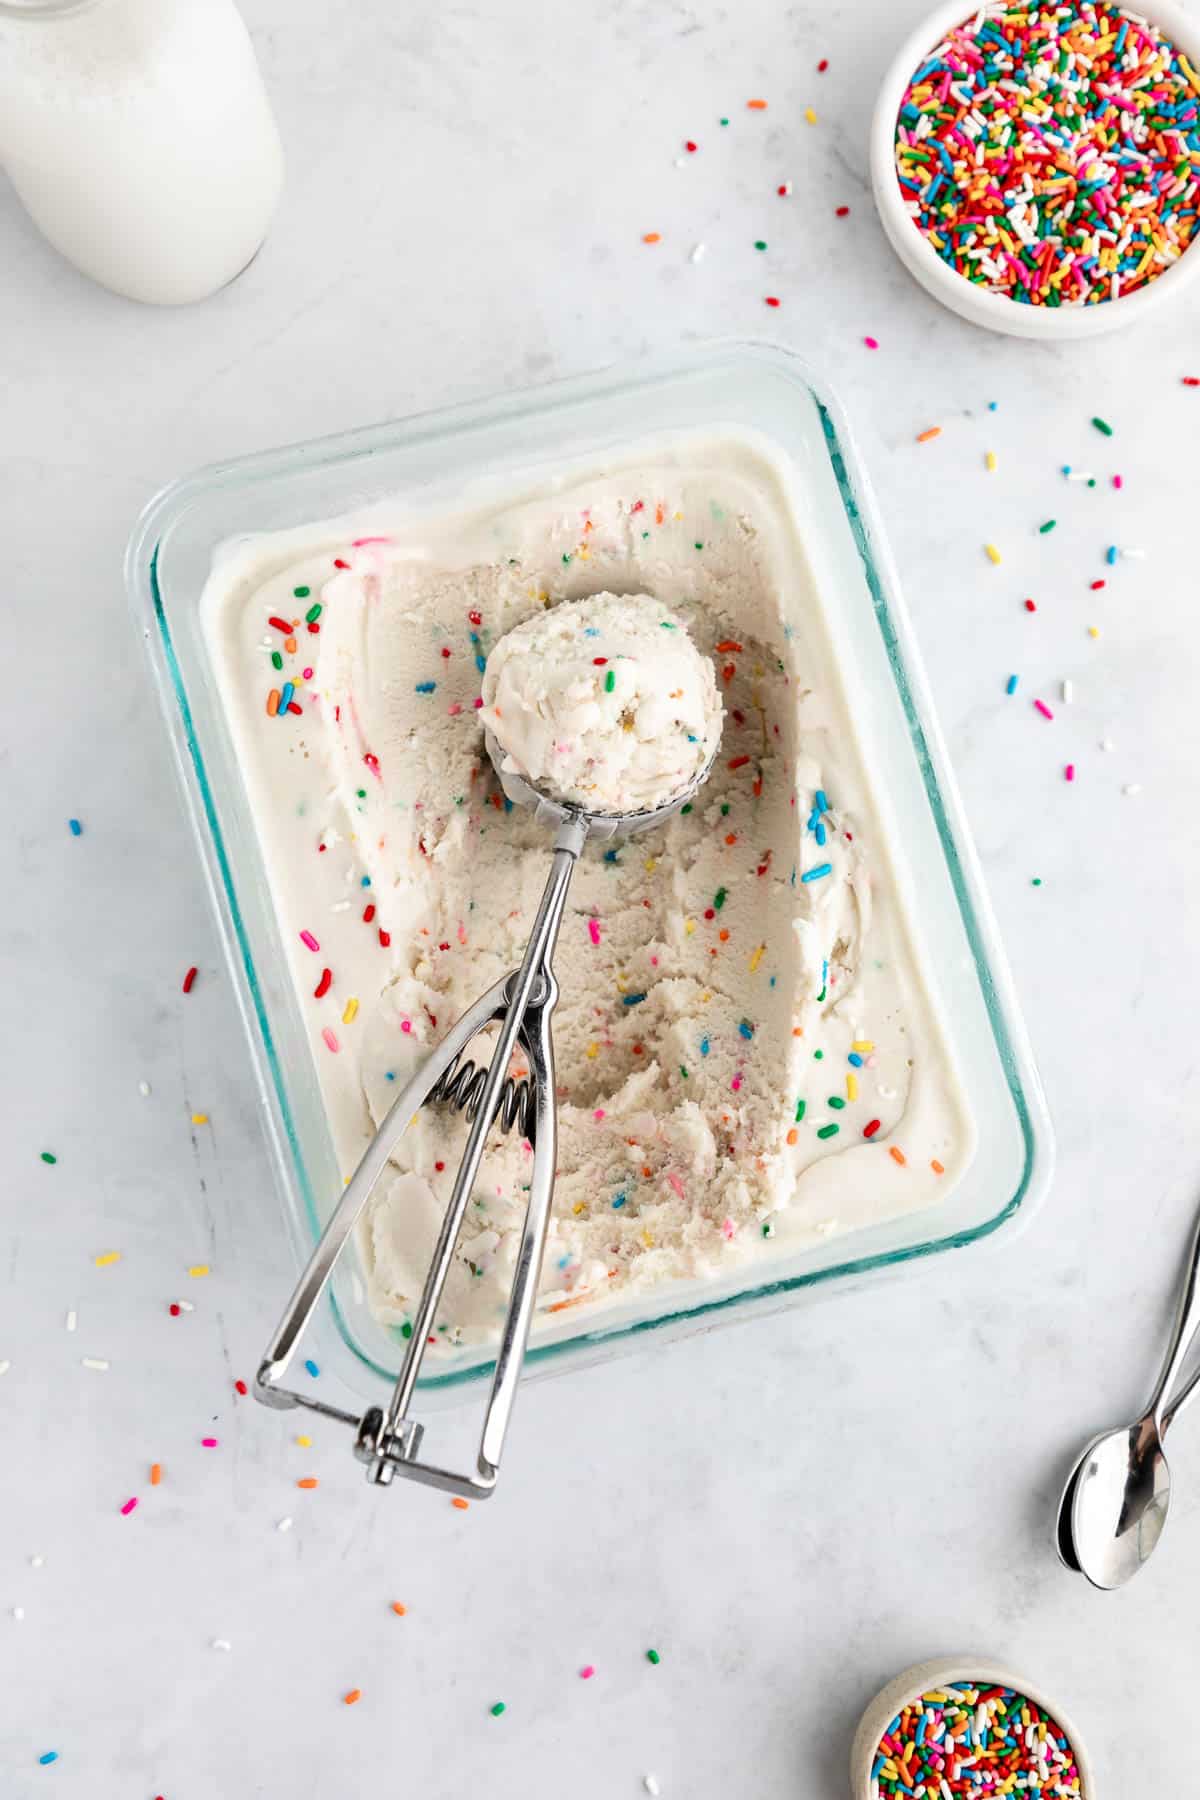 an ice scream scoop scooping vegan cake batter ice cream out of a glass container